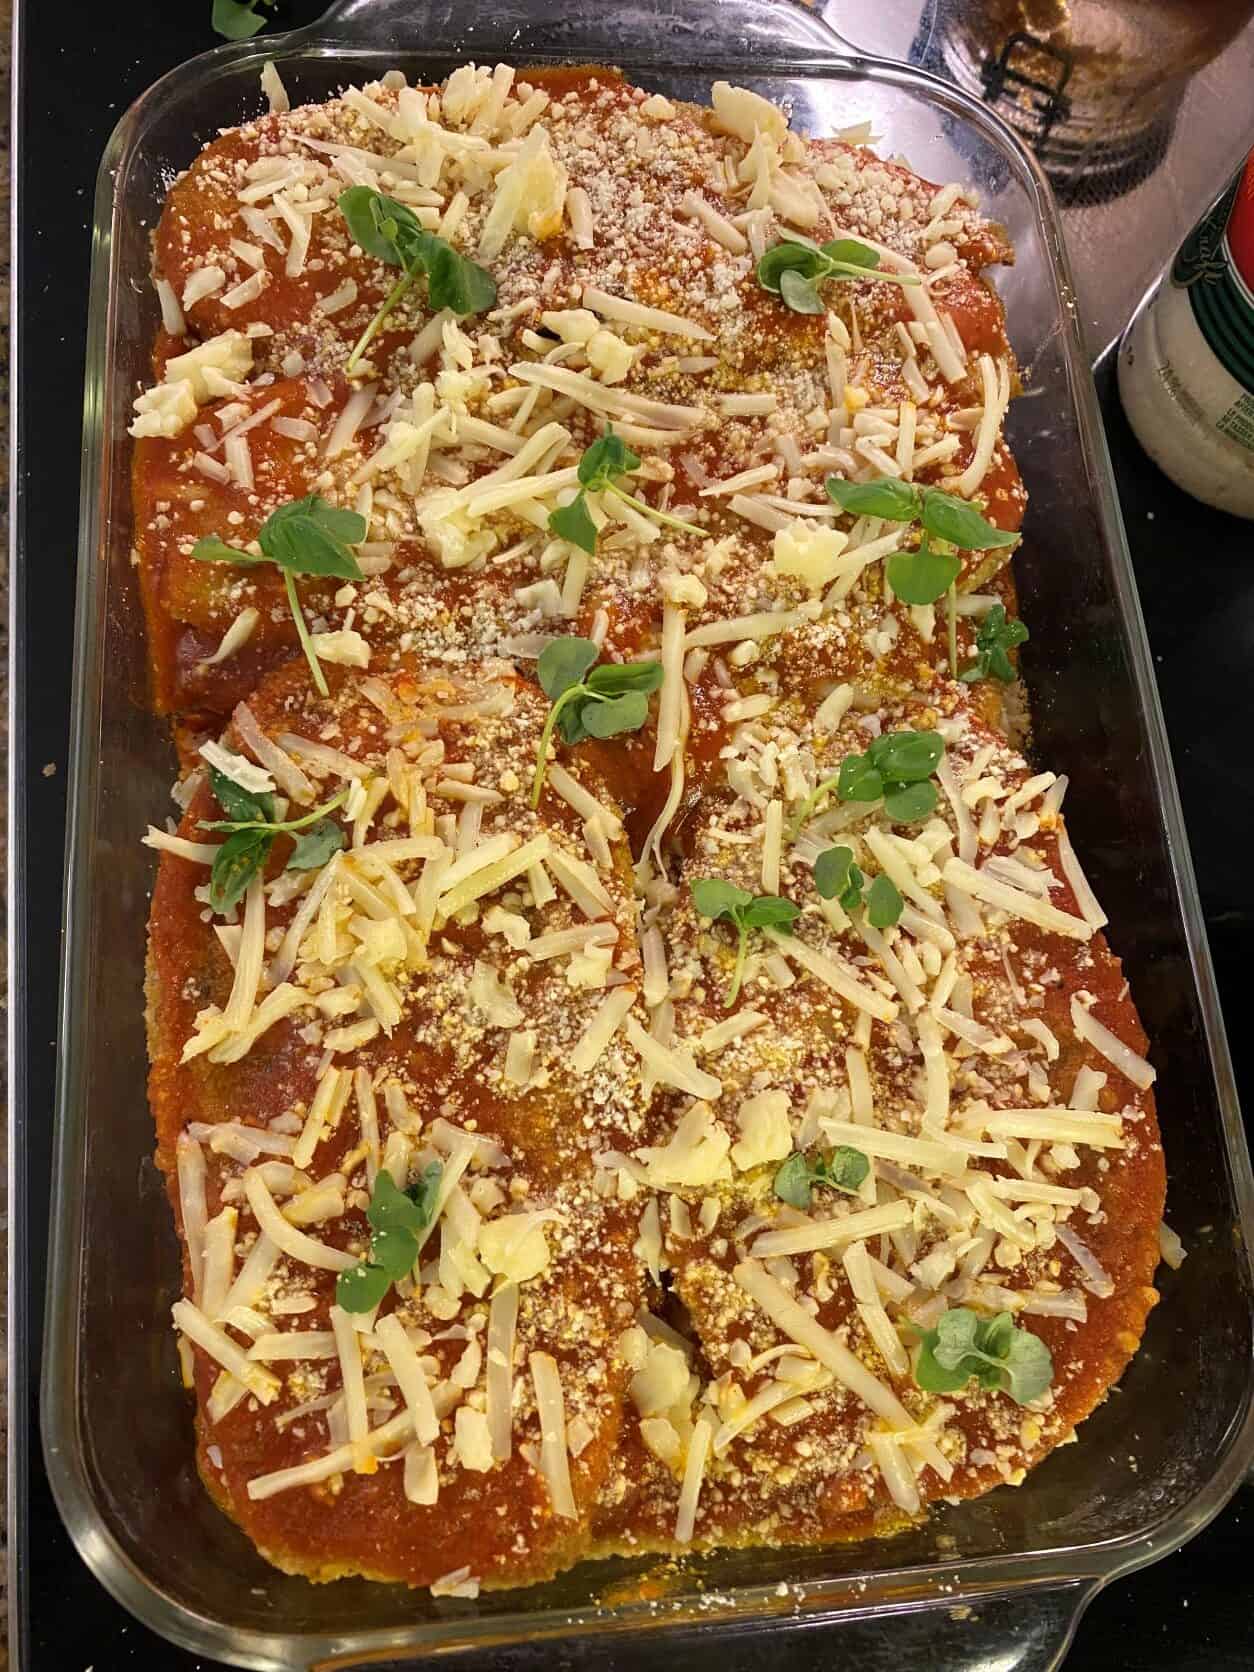 Eggplant parmesan in a baking dish with cheese and basil